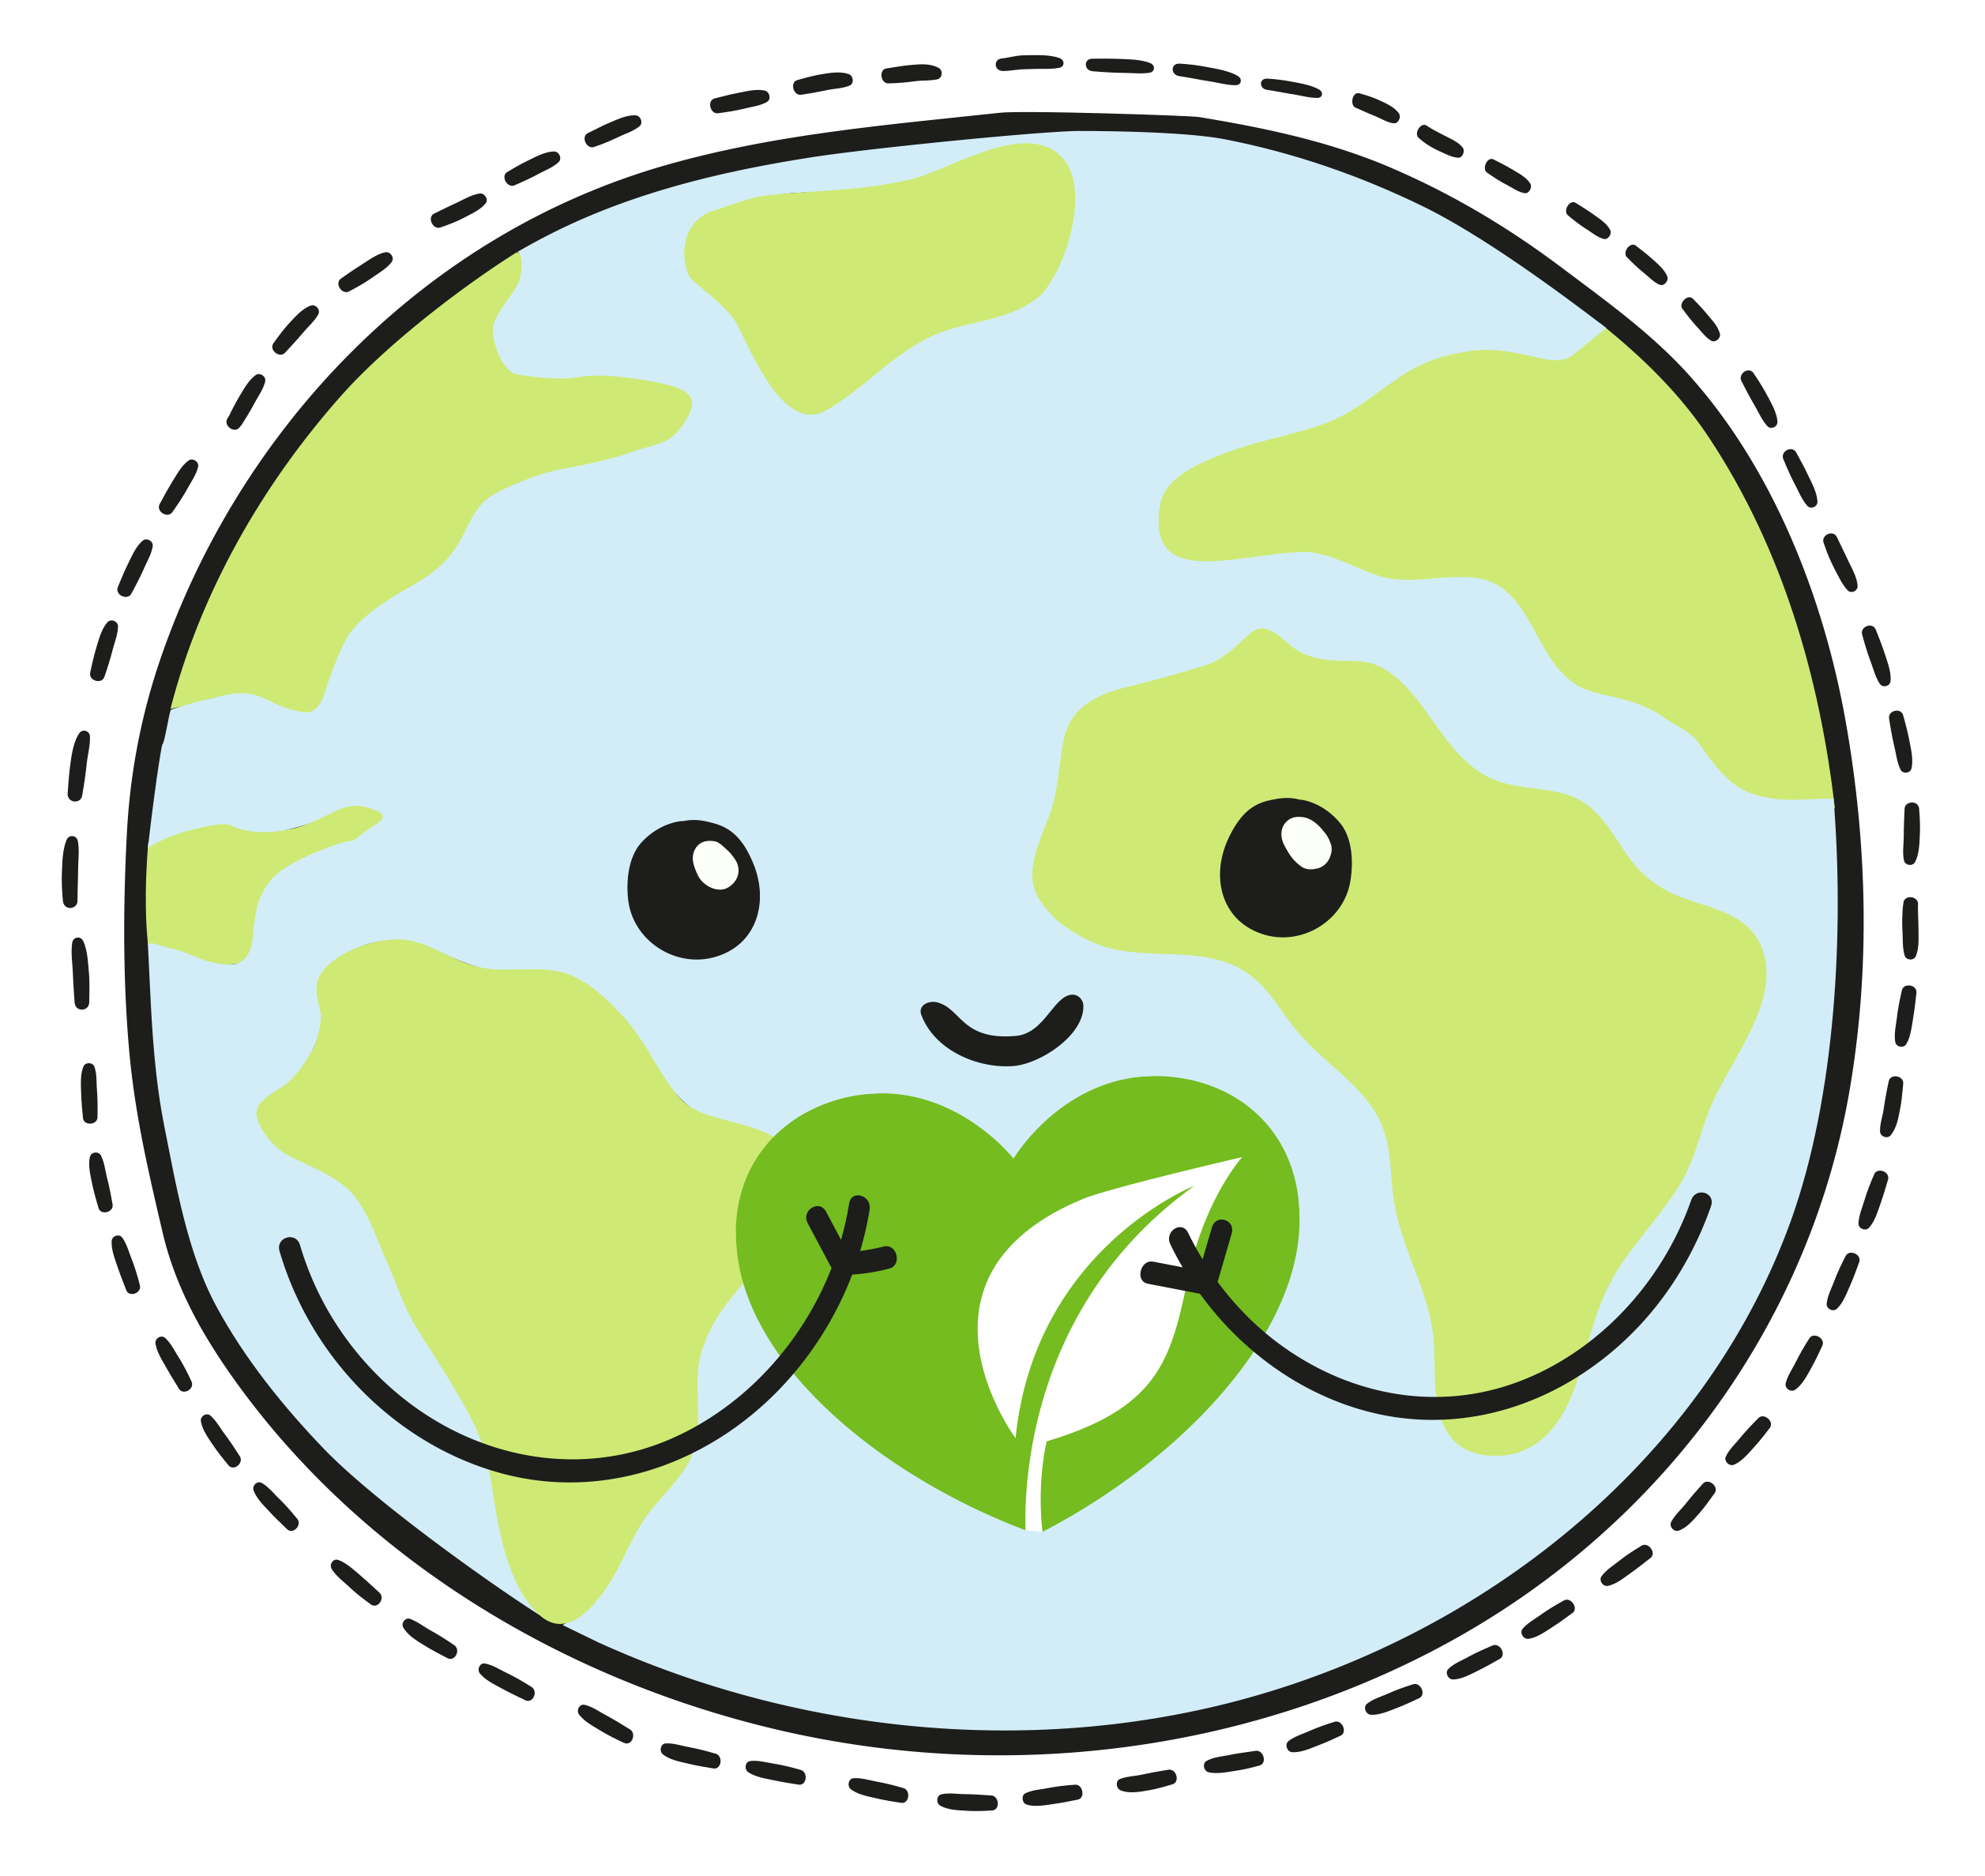 graphic of a smiling globe holding a green heart